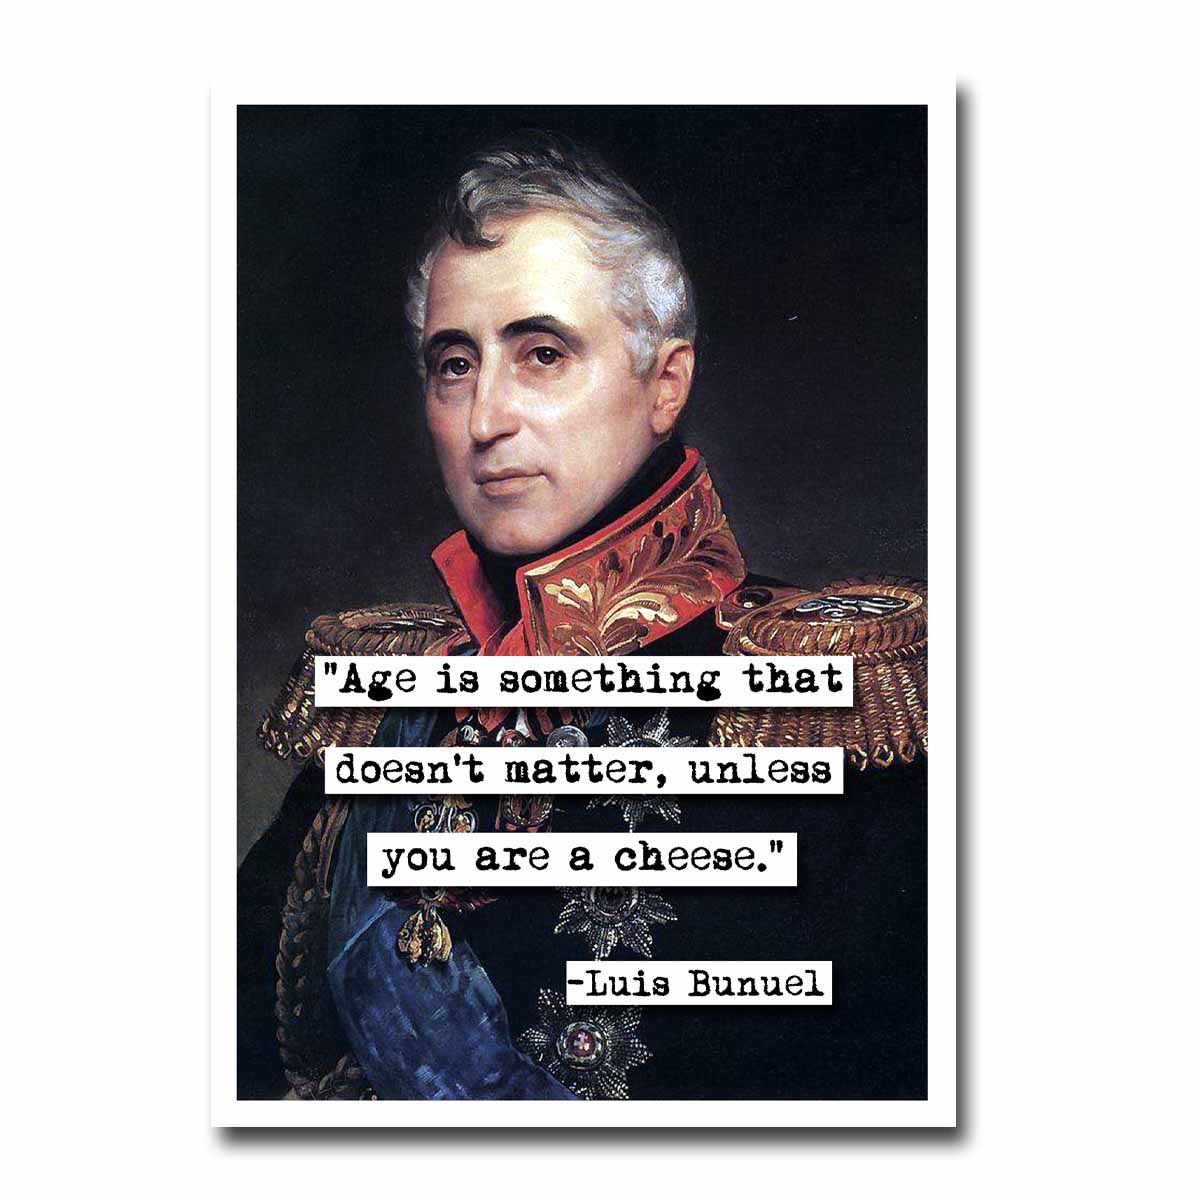 Luis Bunuel Age Quote Blank Greeting Card